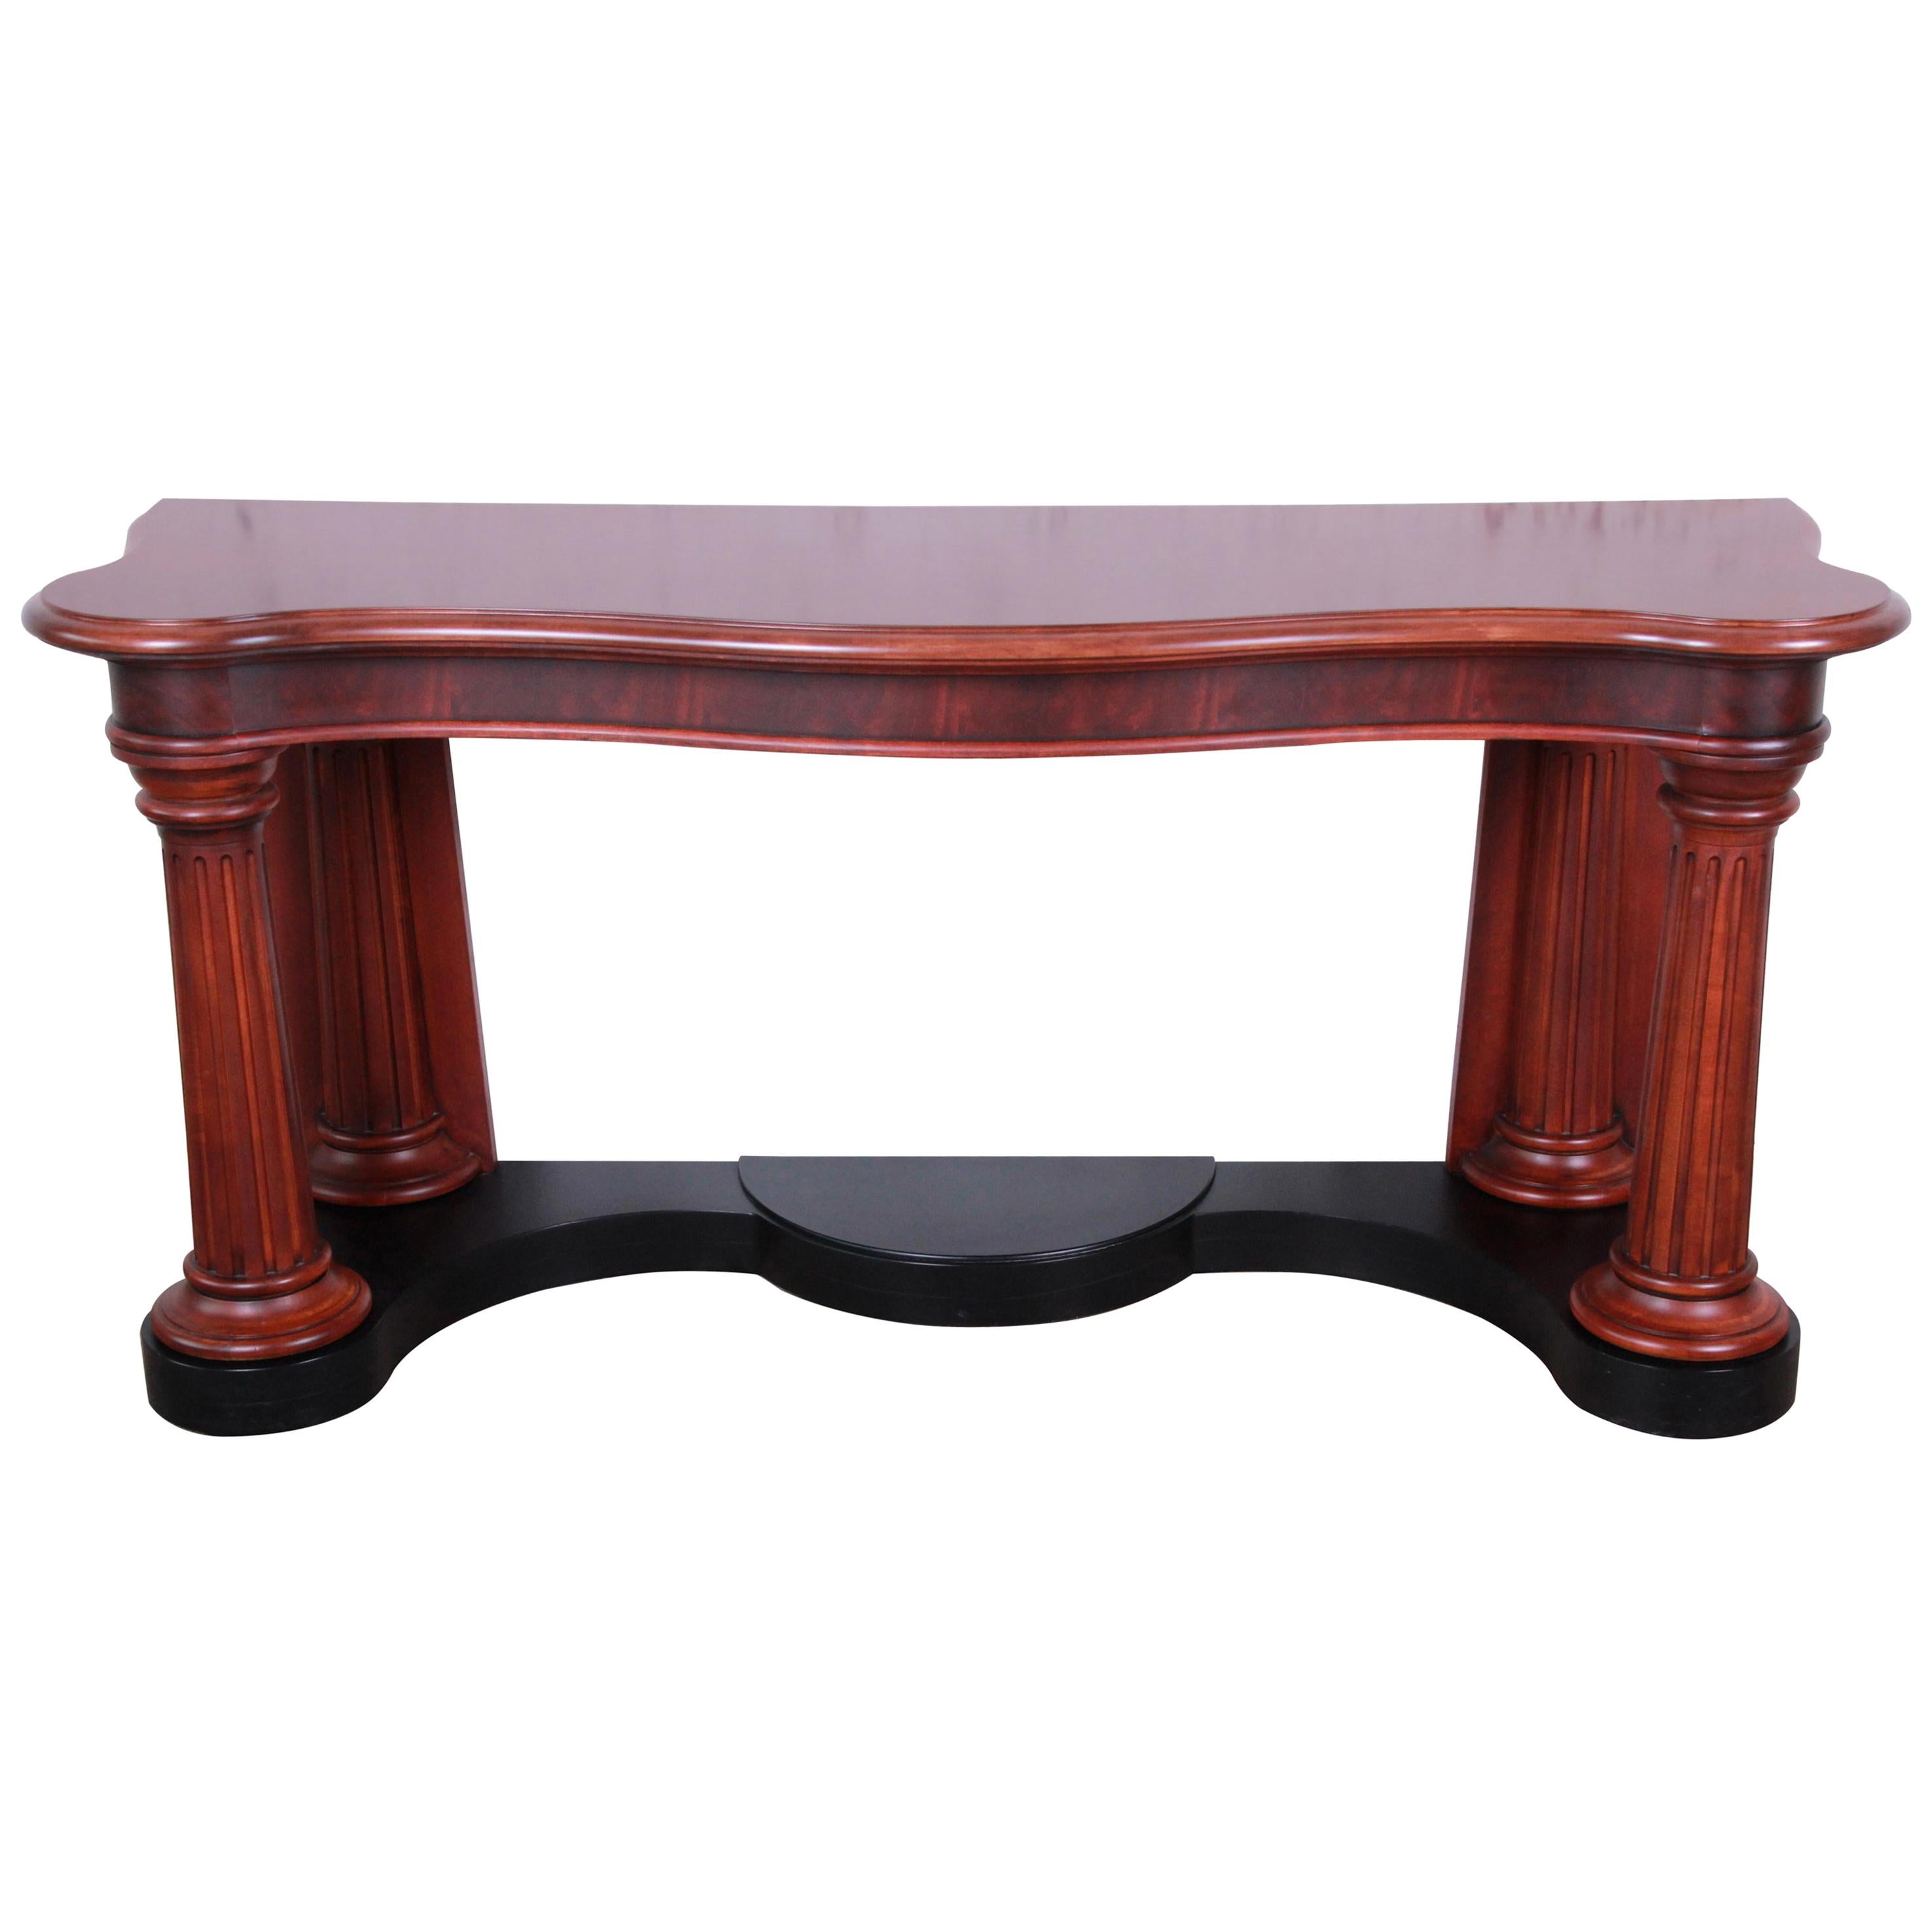 Ralph Lauren Neoclassical Flame Mahogany Console or Entry Table